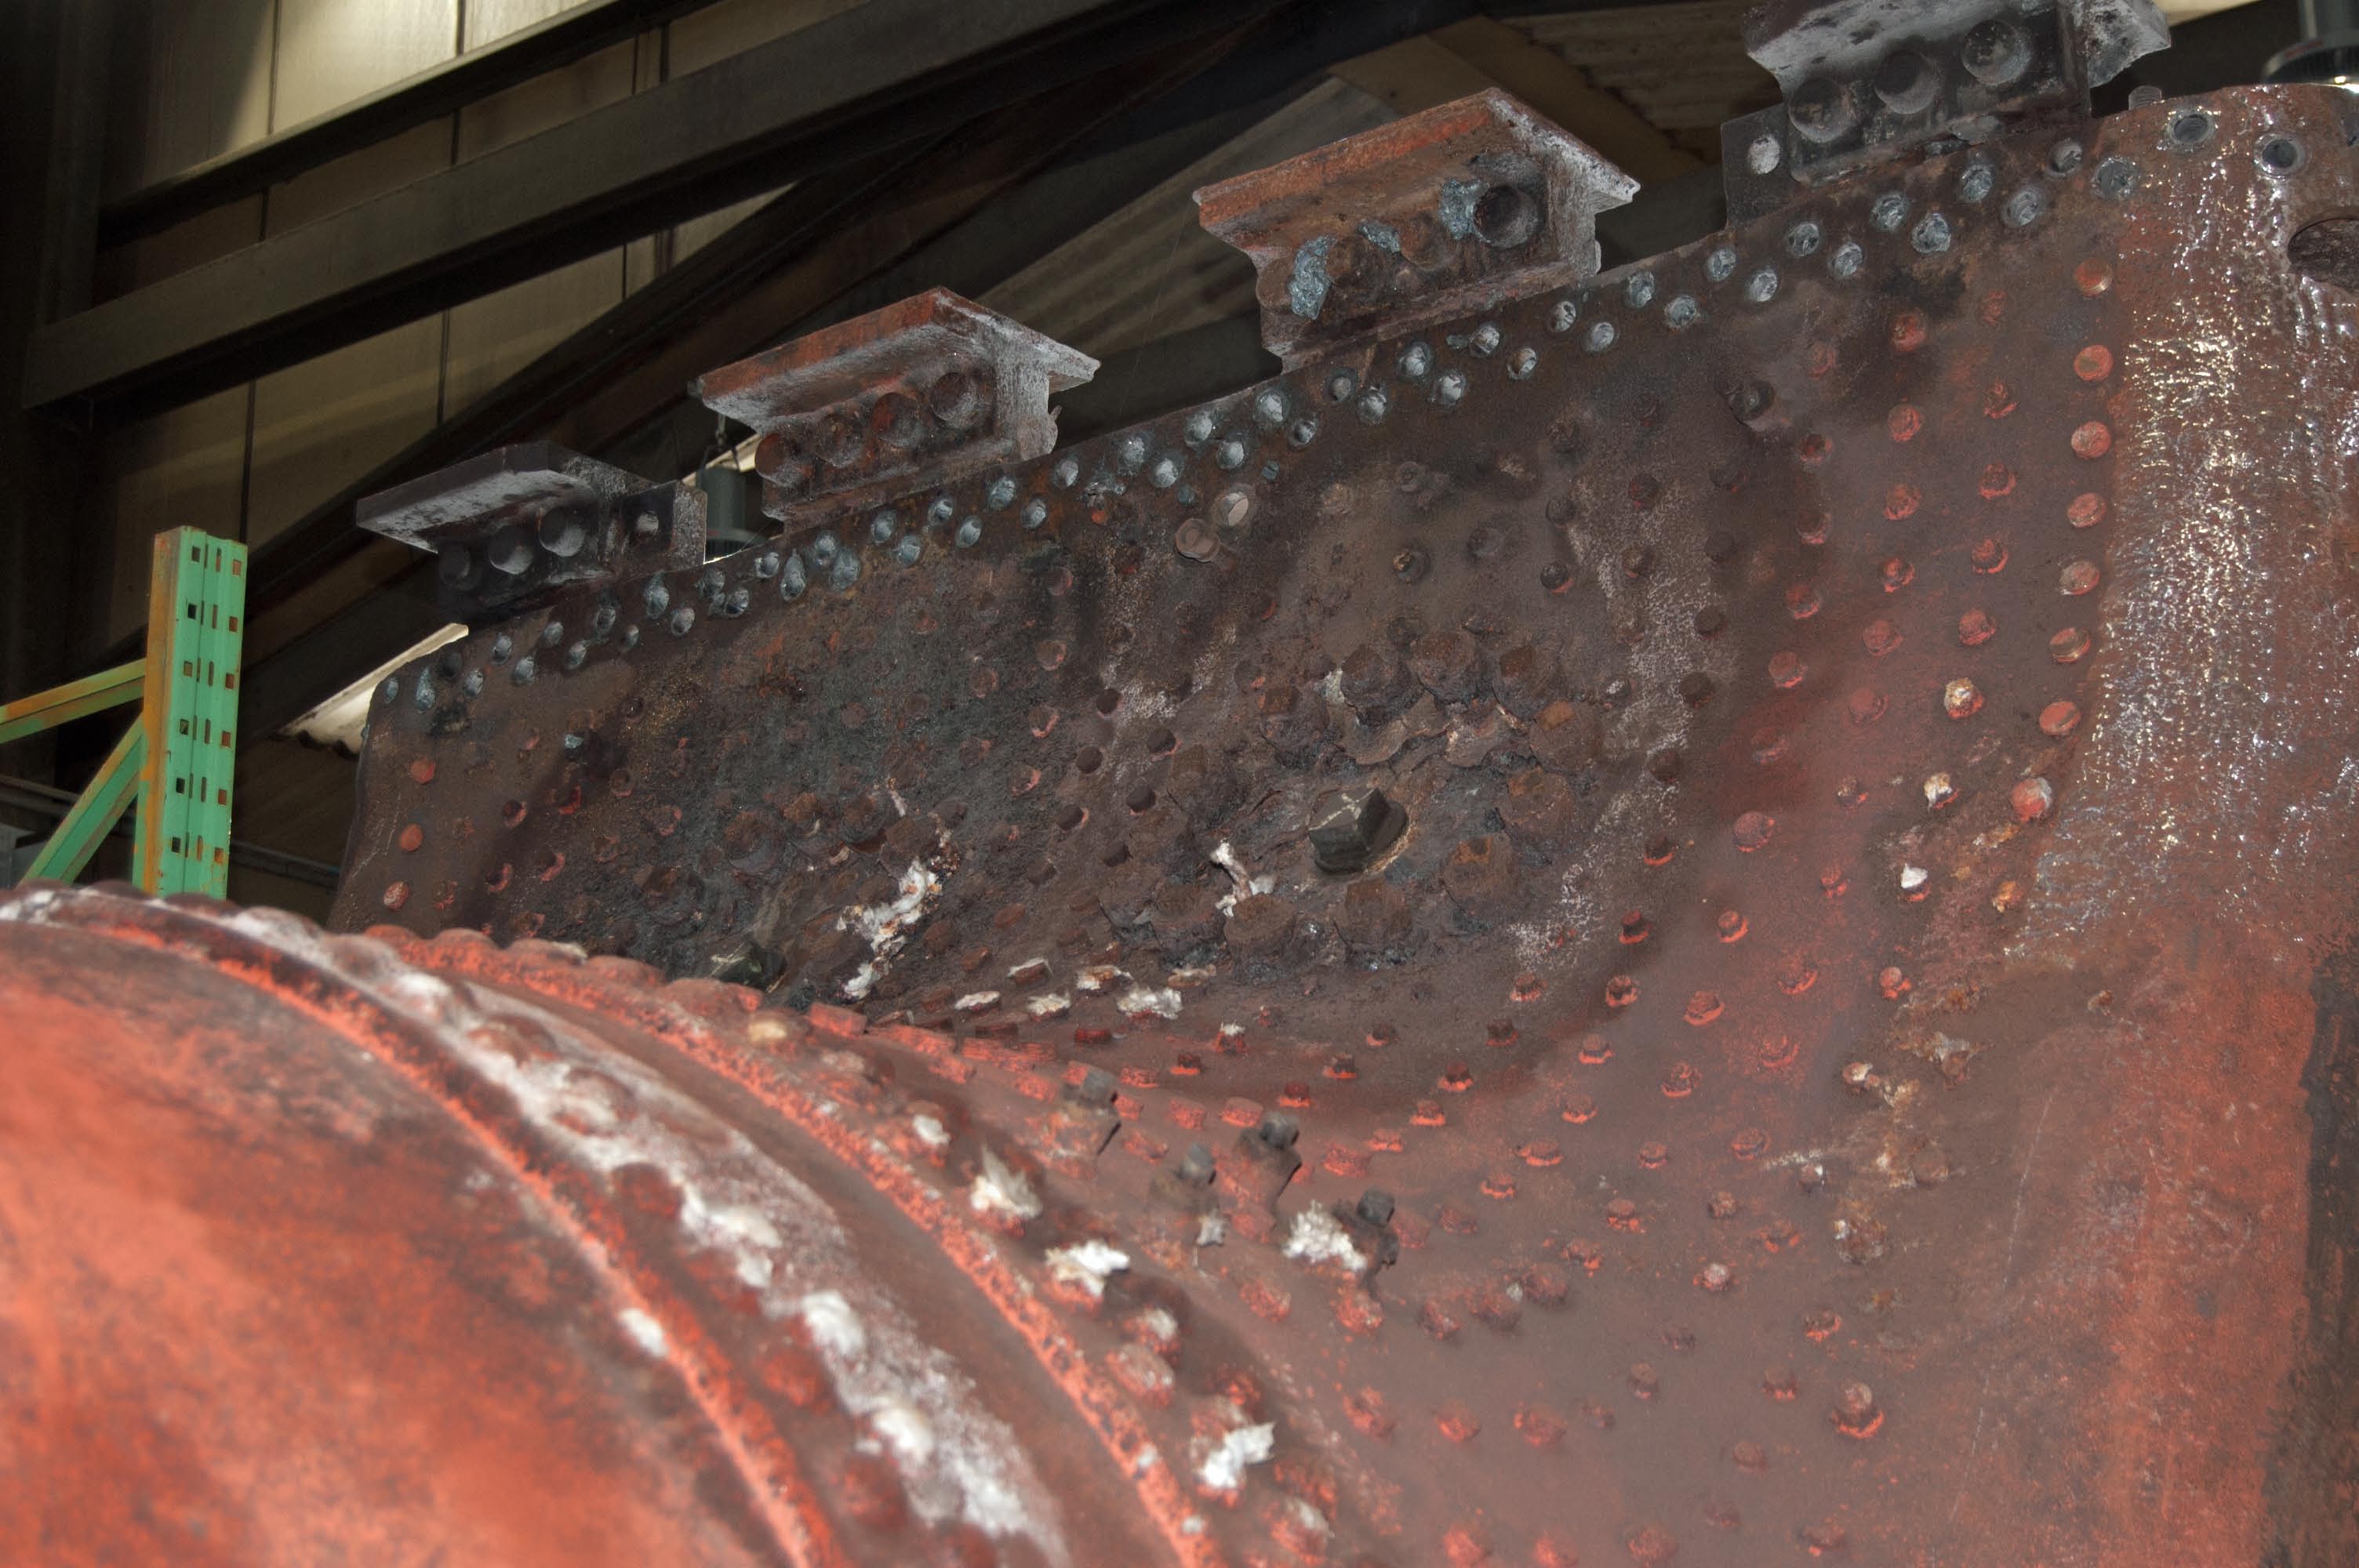 Work is underway on cleaning up the boiler plate, so that it can be tested for thickness